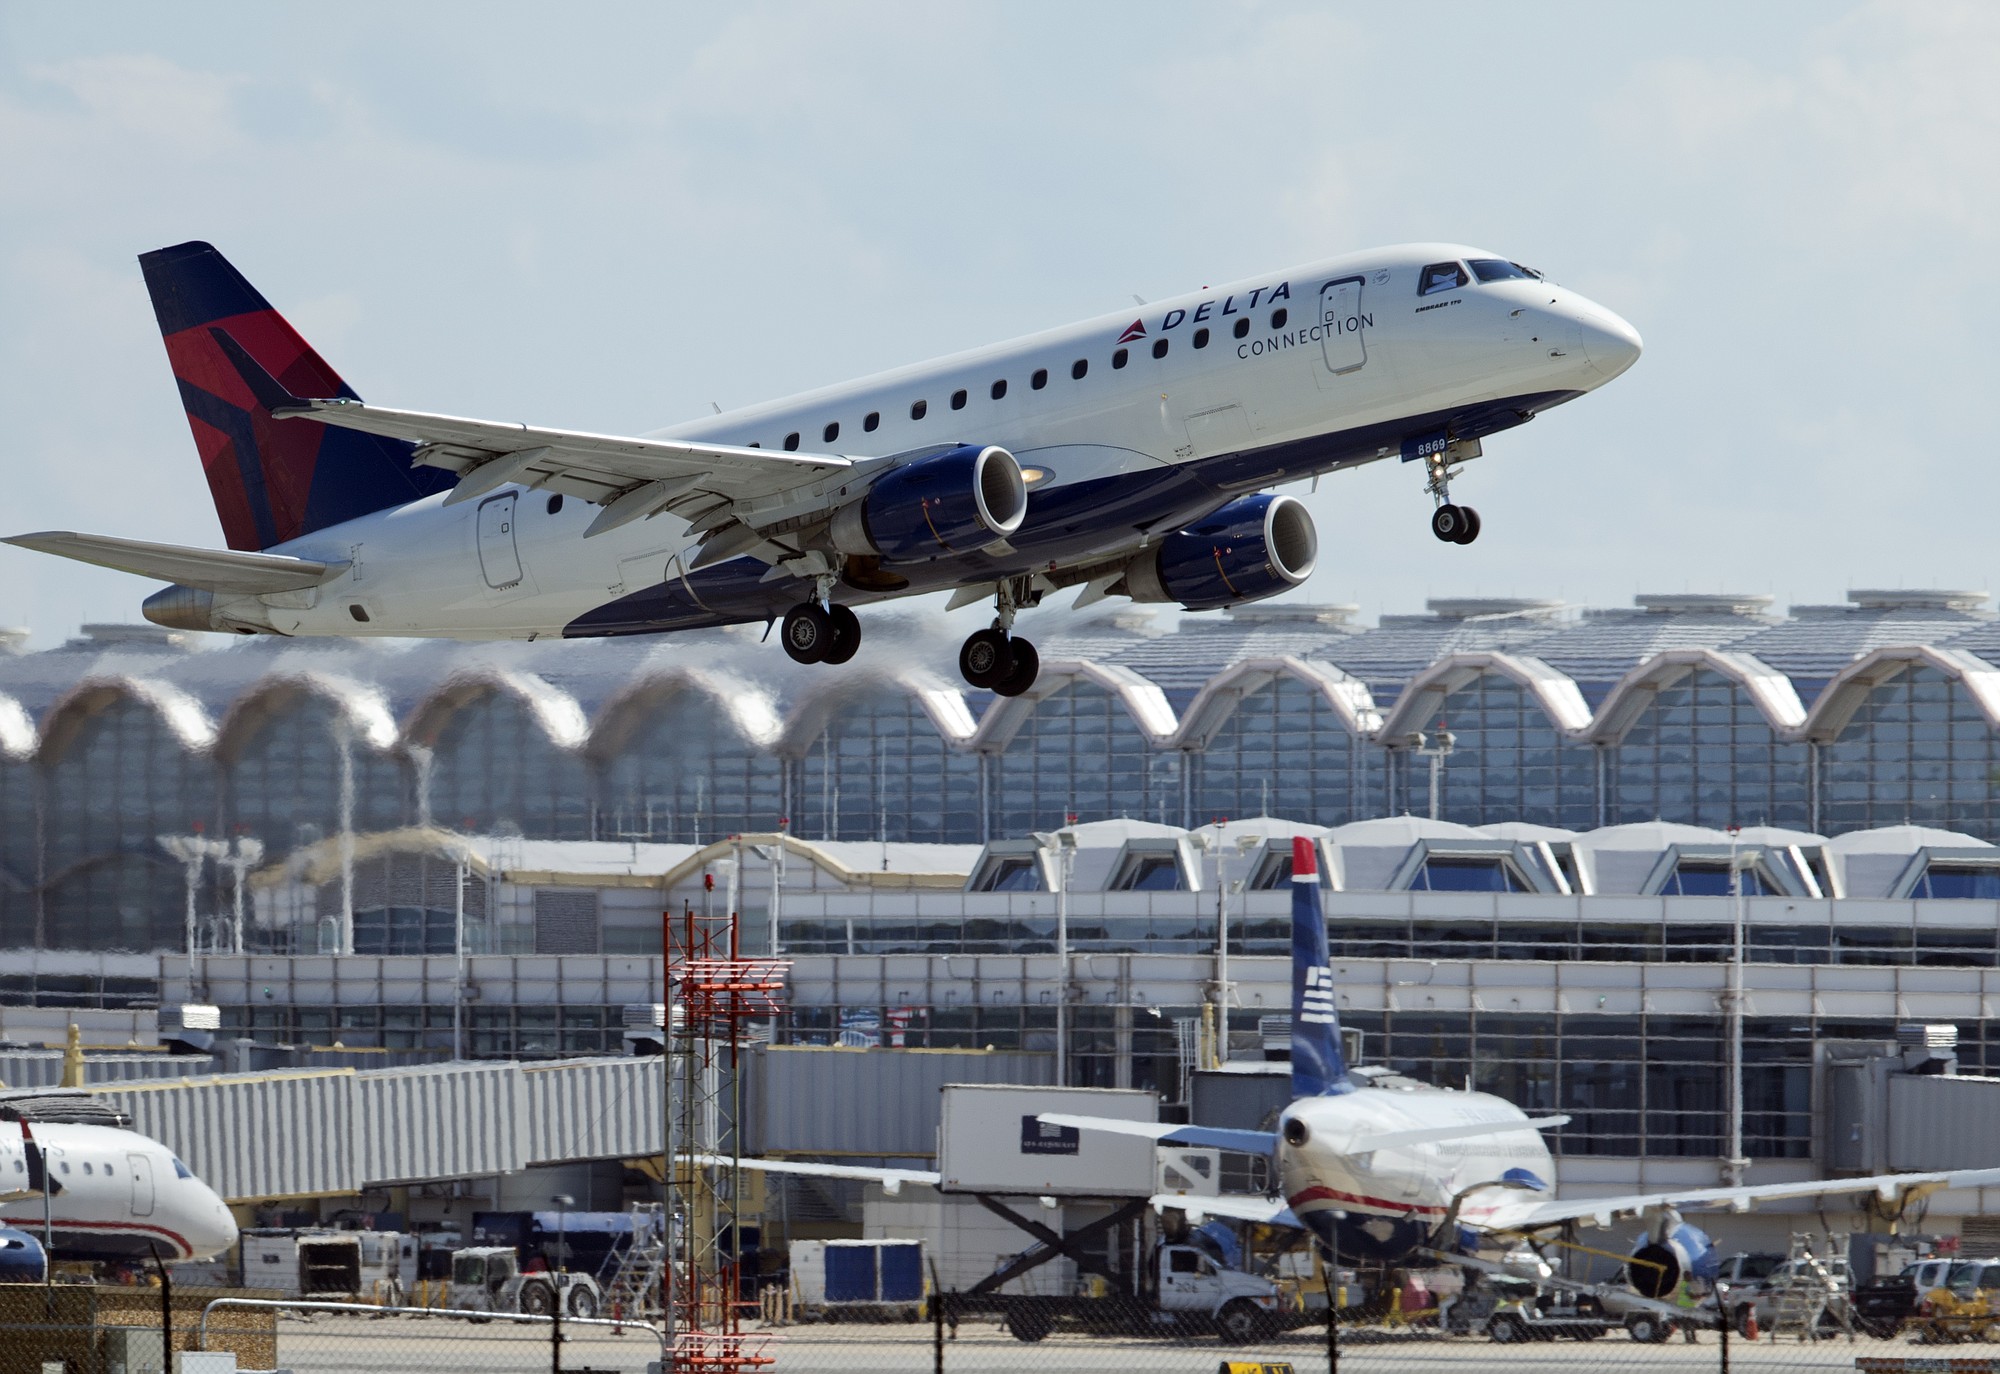 Associated Press files
Delta Air Lines has been assessed the largest fine for neglected or mistreated disabled passengers -- $2 million -- for 22 violations from 2007 to 2011, according to federal records.